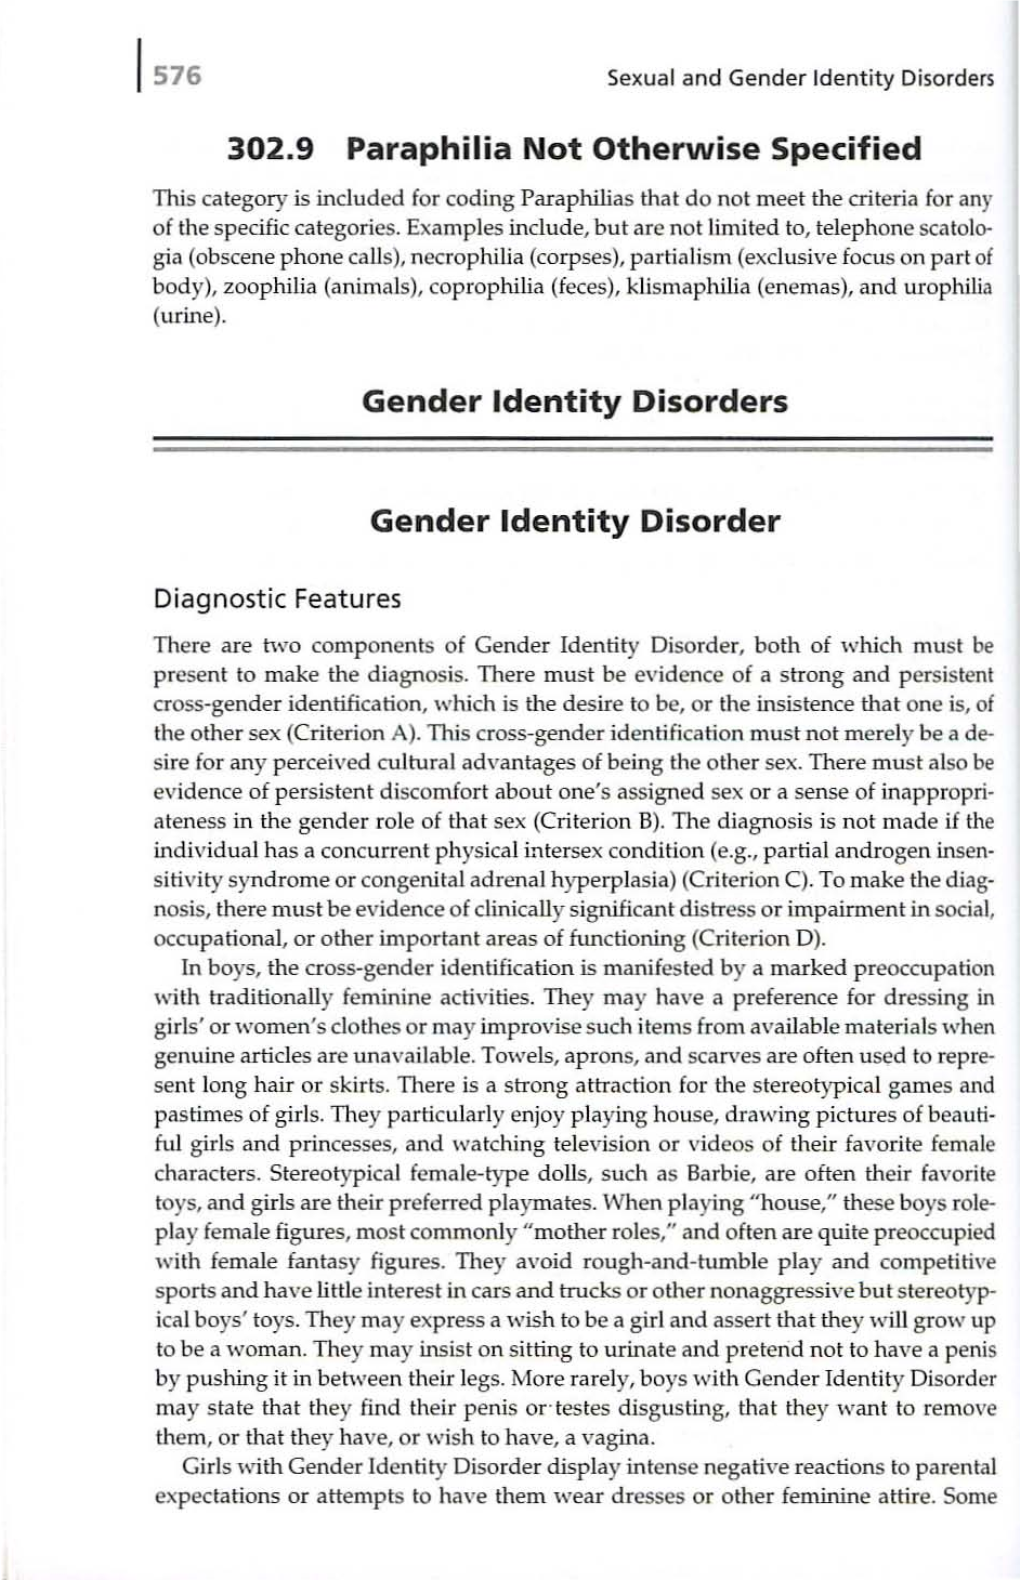 302.9 Paraphilia Not Otherwise Specified Gender Identity Disorders